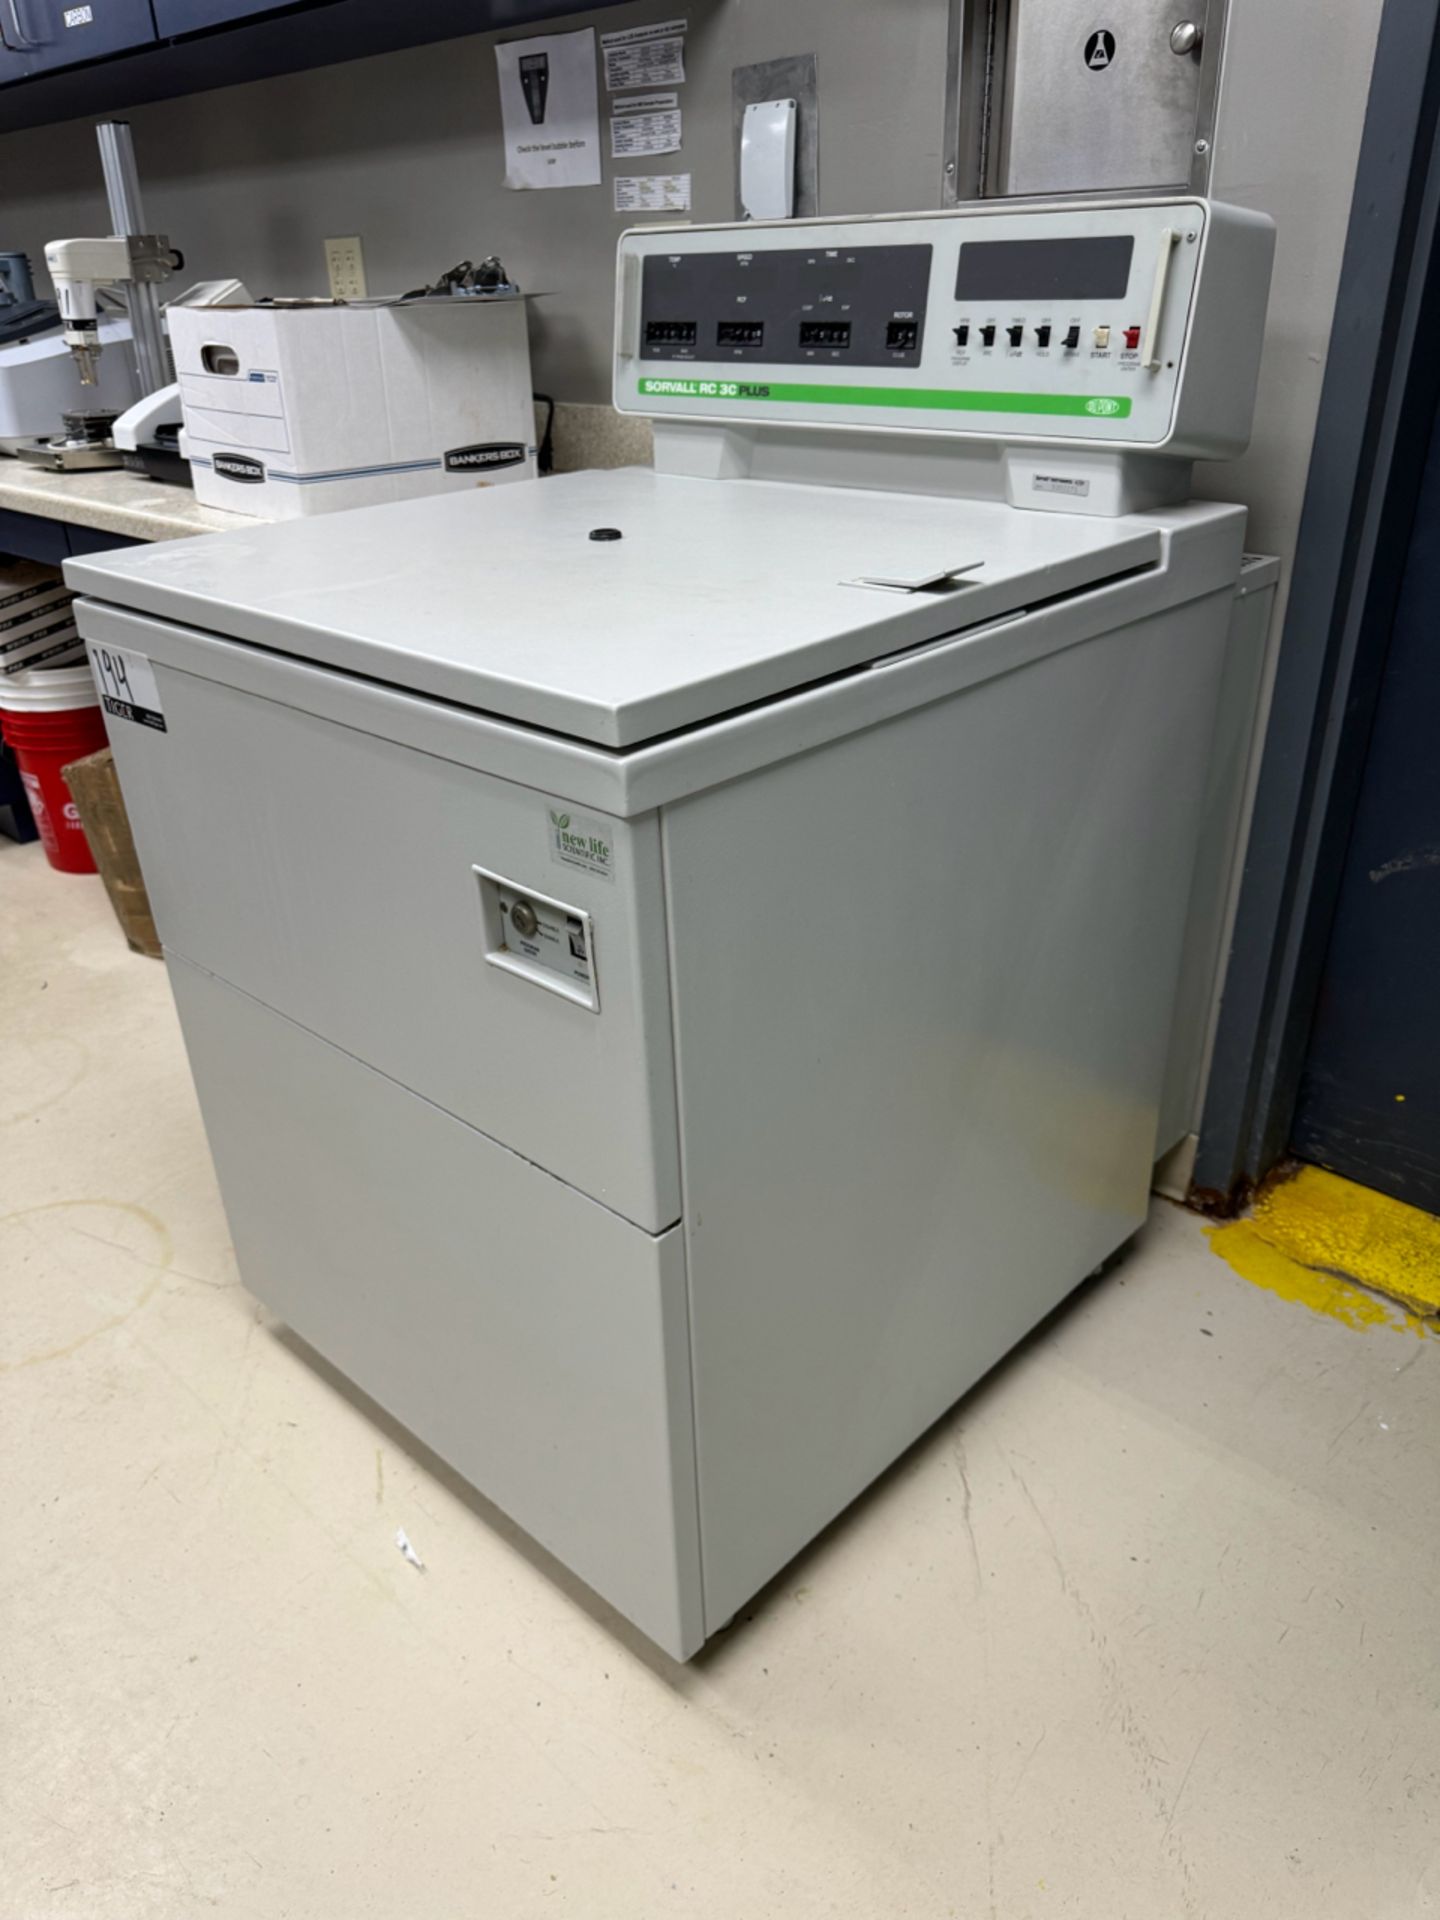 Sorvall RC 3C Plus High Capacity Centrifuge Thermal Scientific - Image 7 of 9